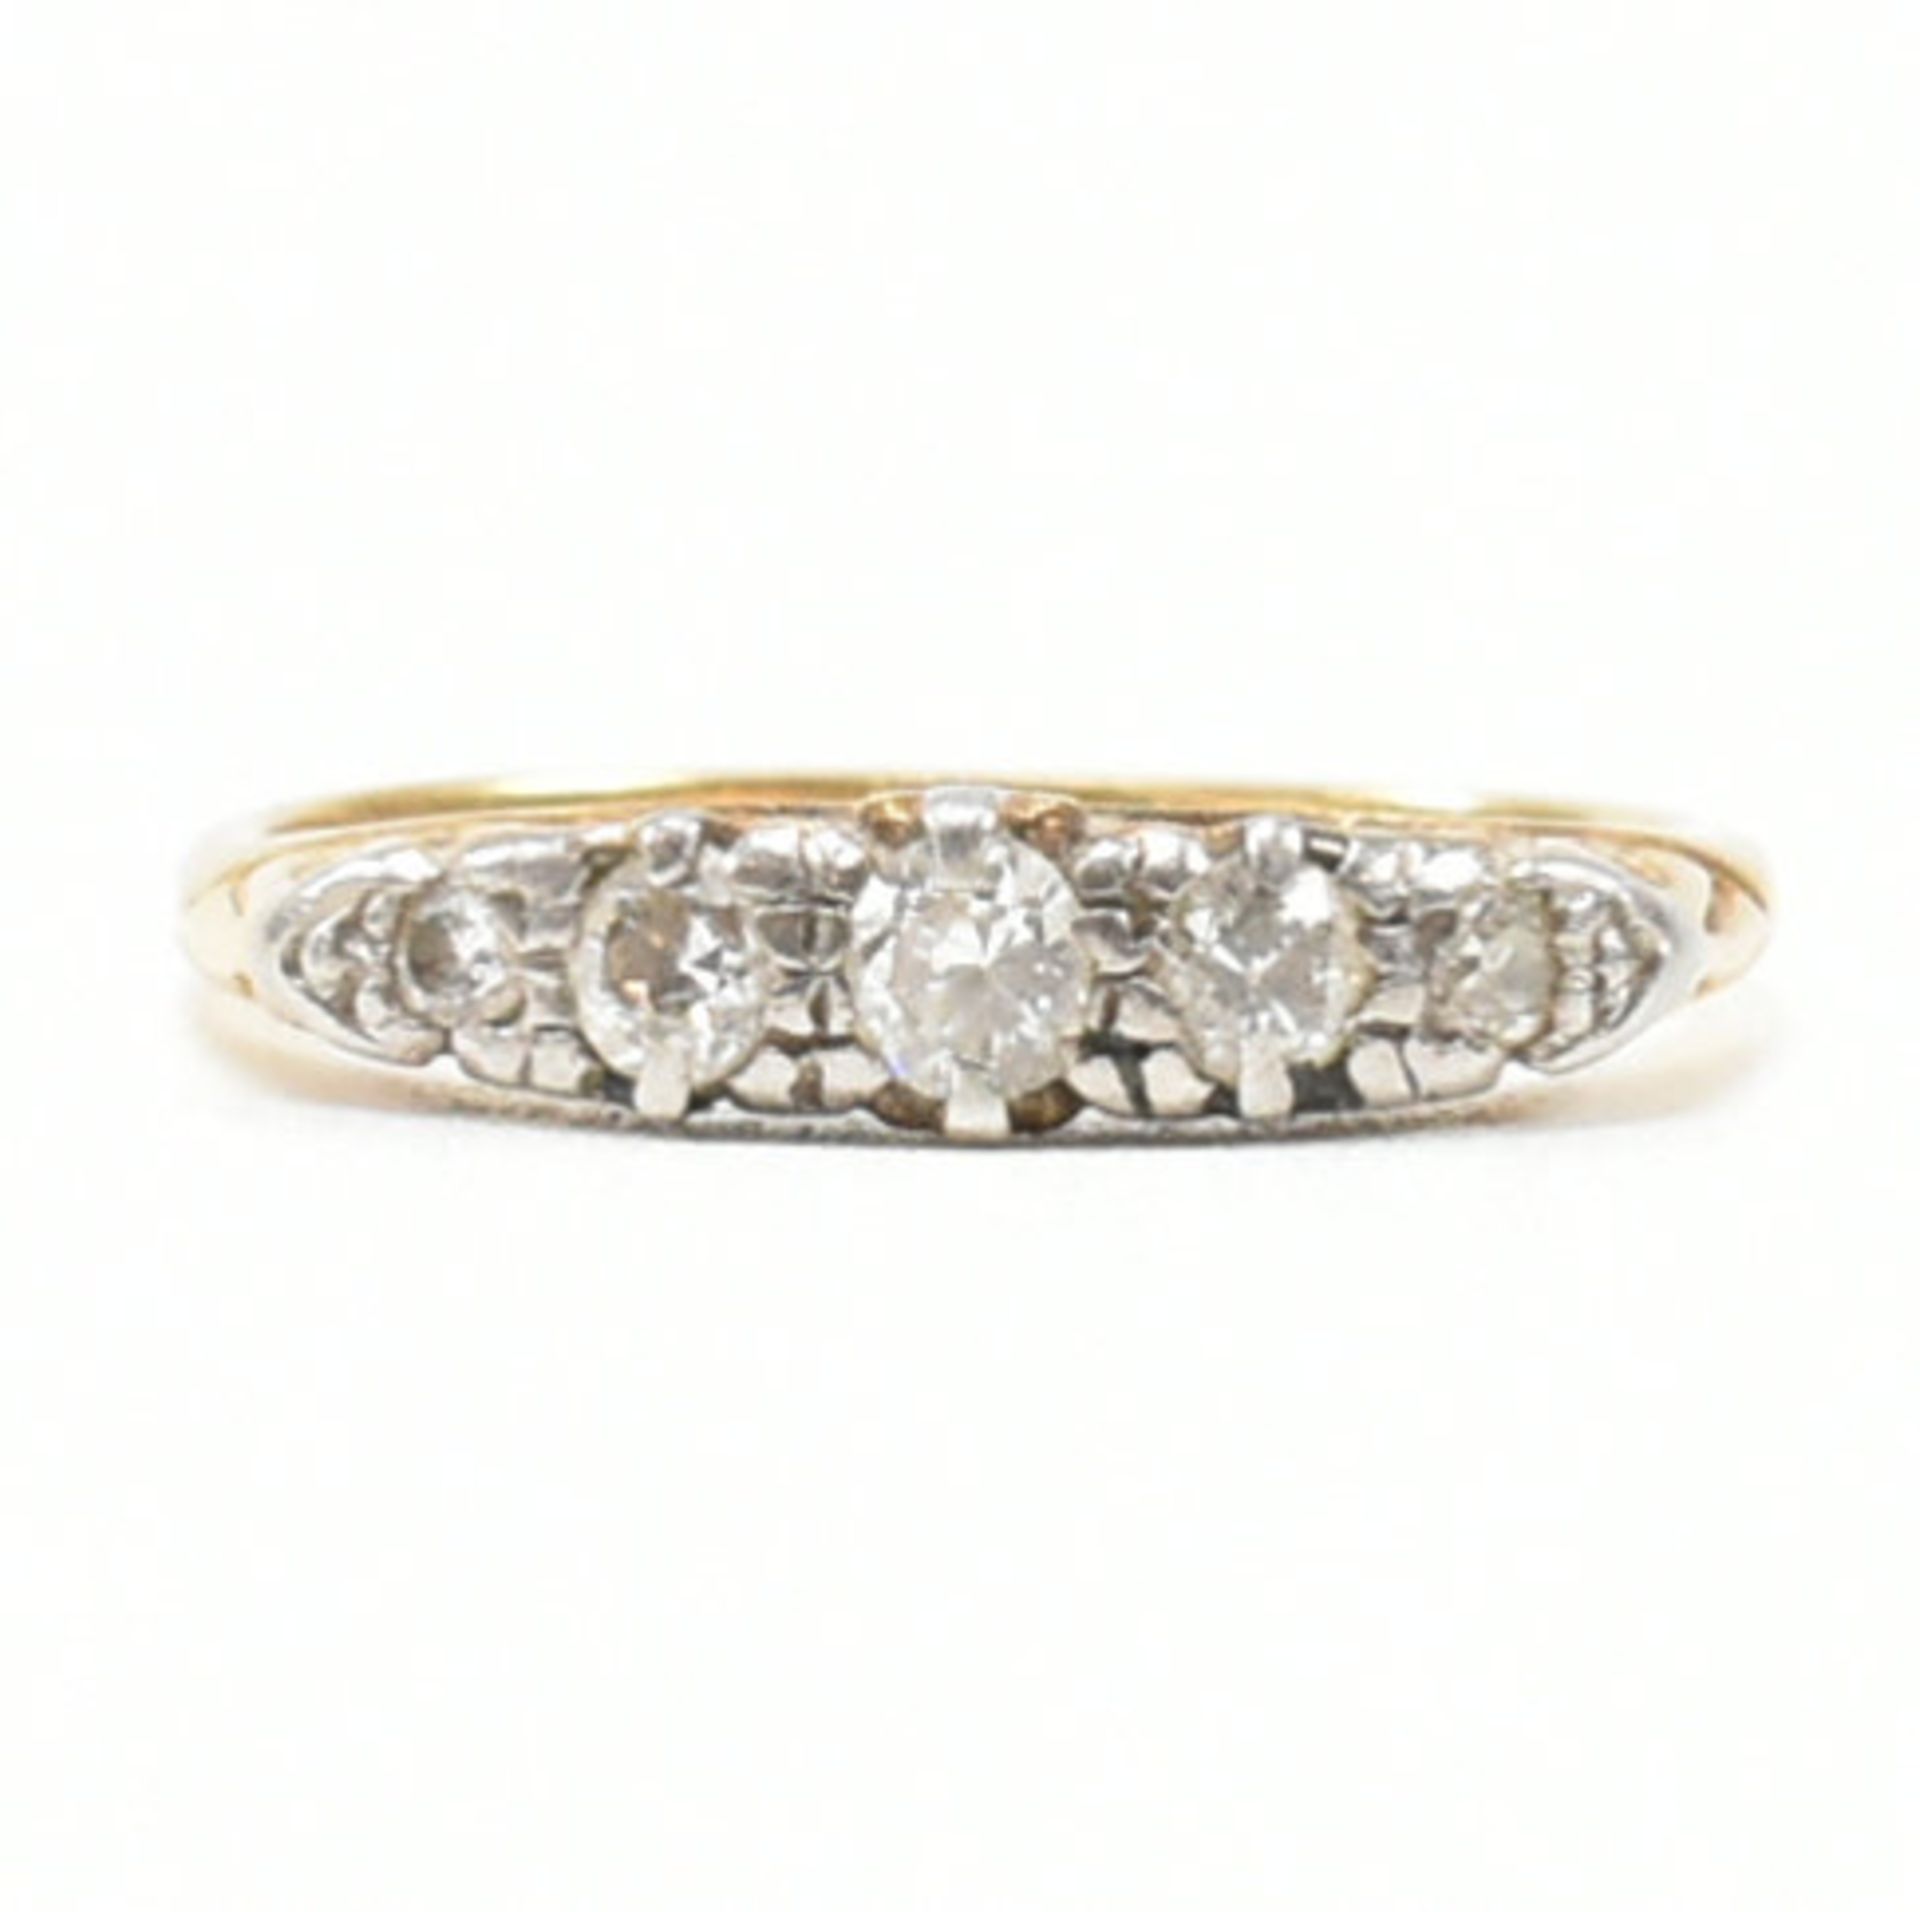 18CT GOLD & DIAMOND FIVE STONE RING - Image 10 of 12